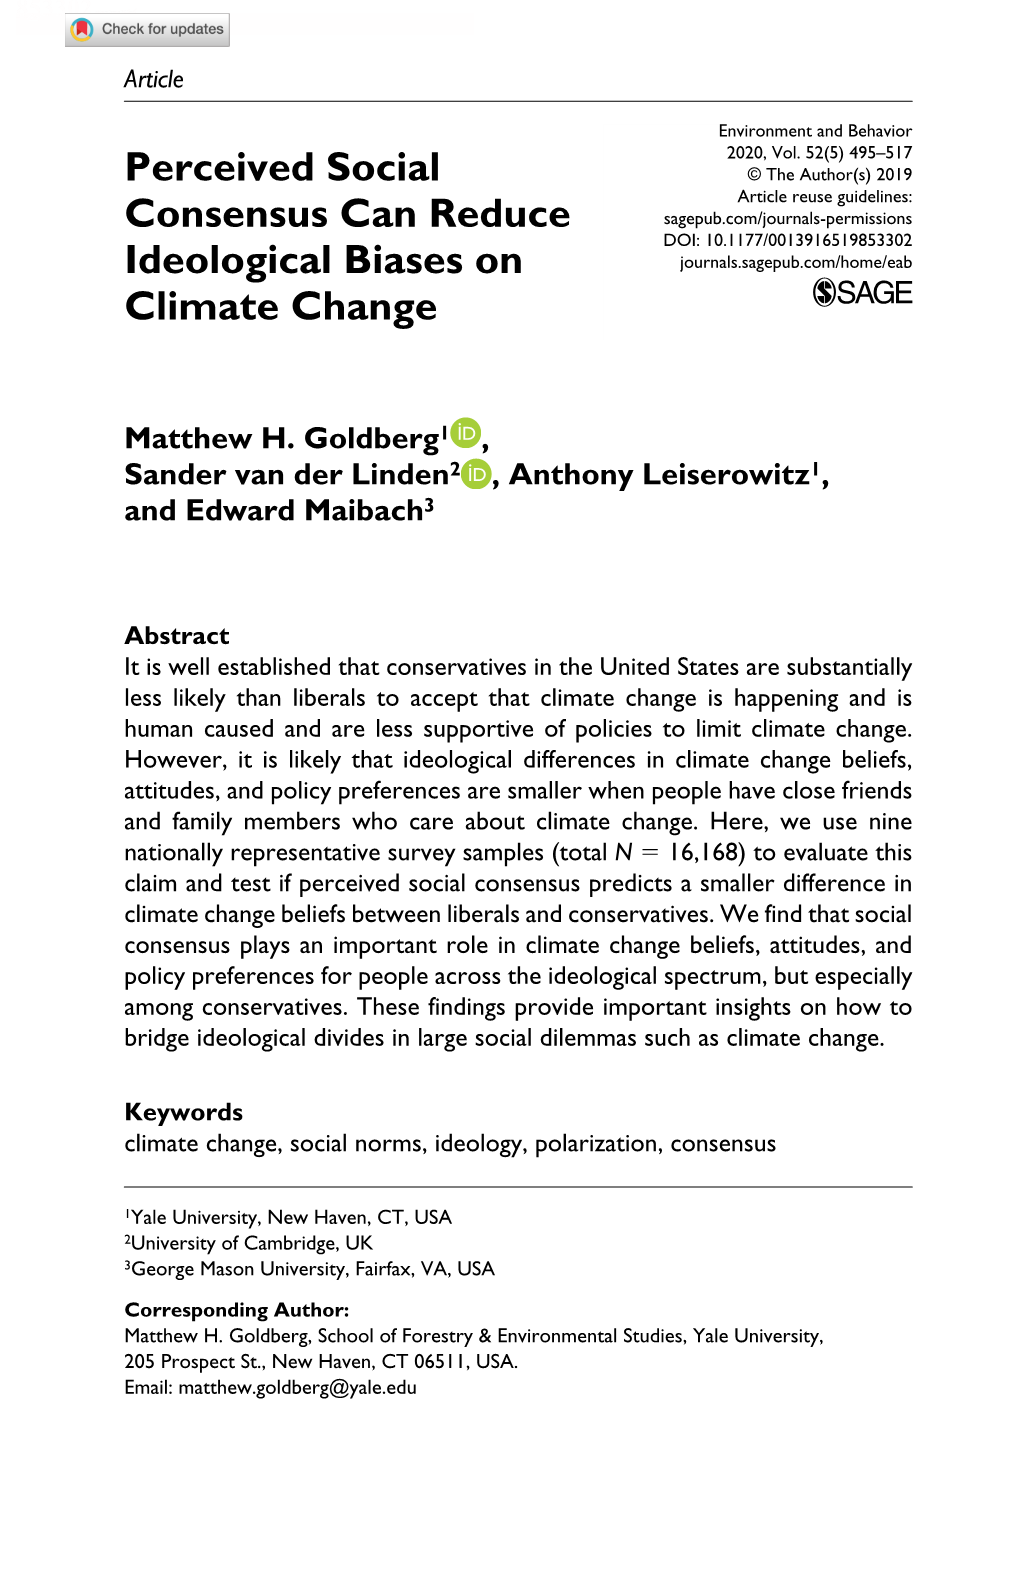 Perceived Social Consensus Can Reduce Ideological Biases on Climate Change